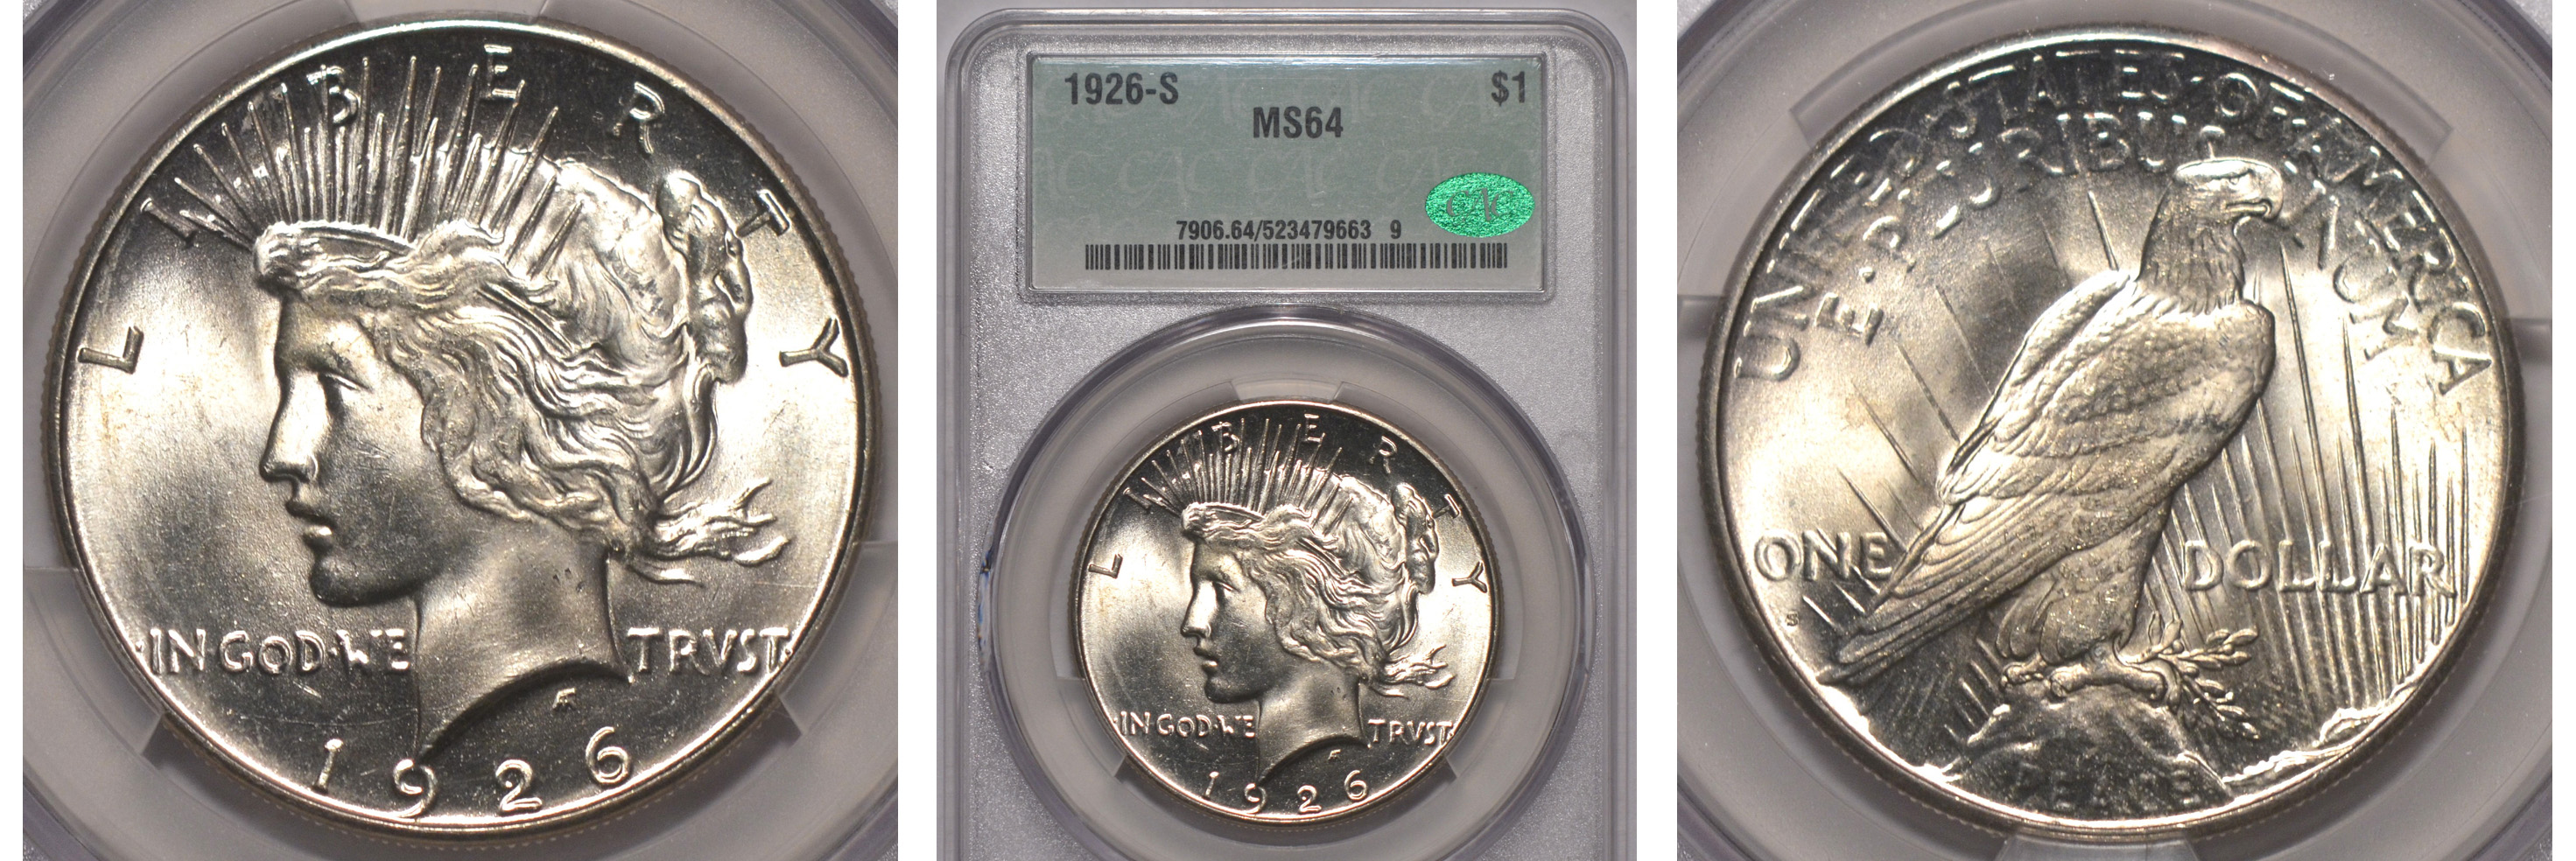 1926-S Silver Peace Dollar $1 CACG MS64